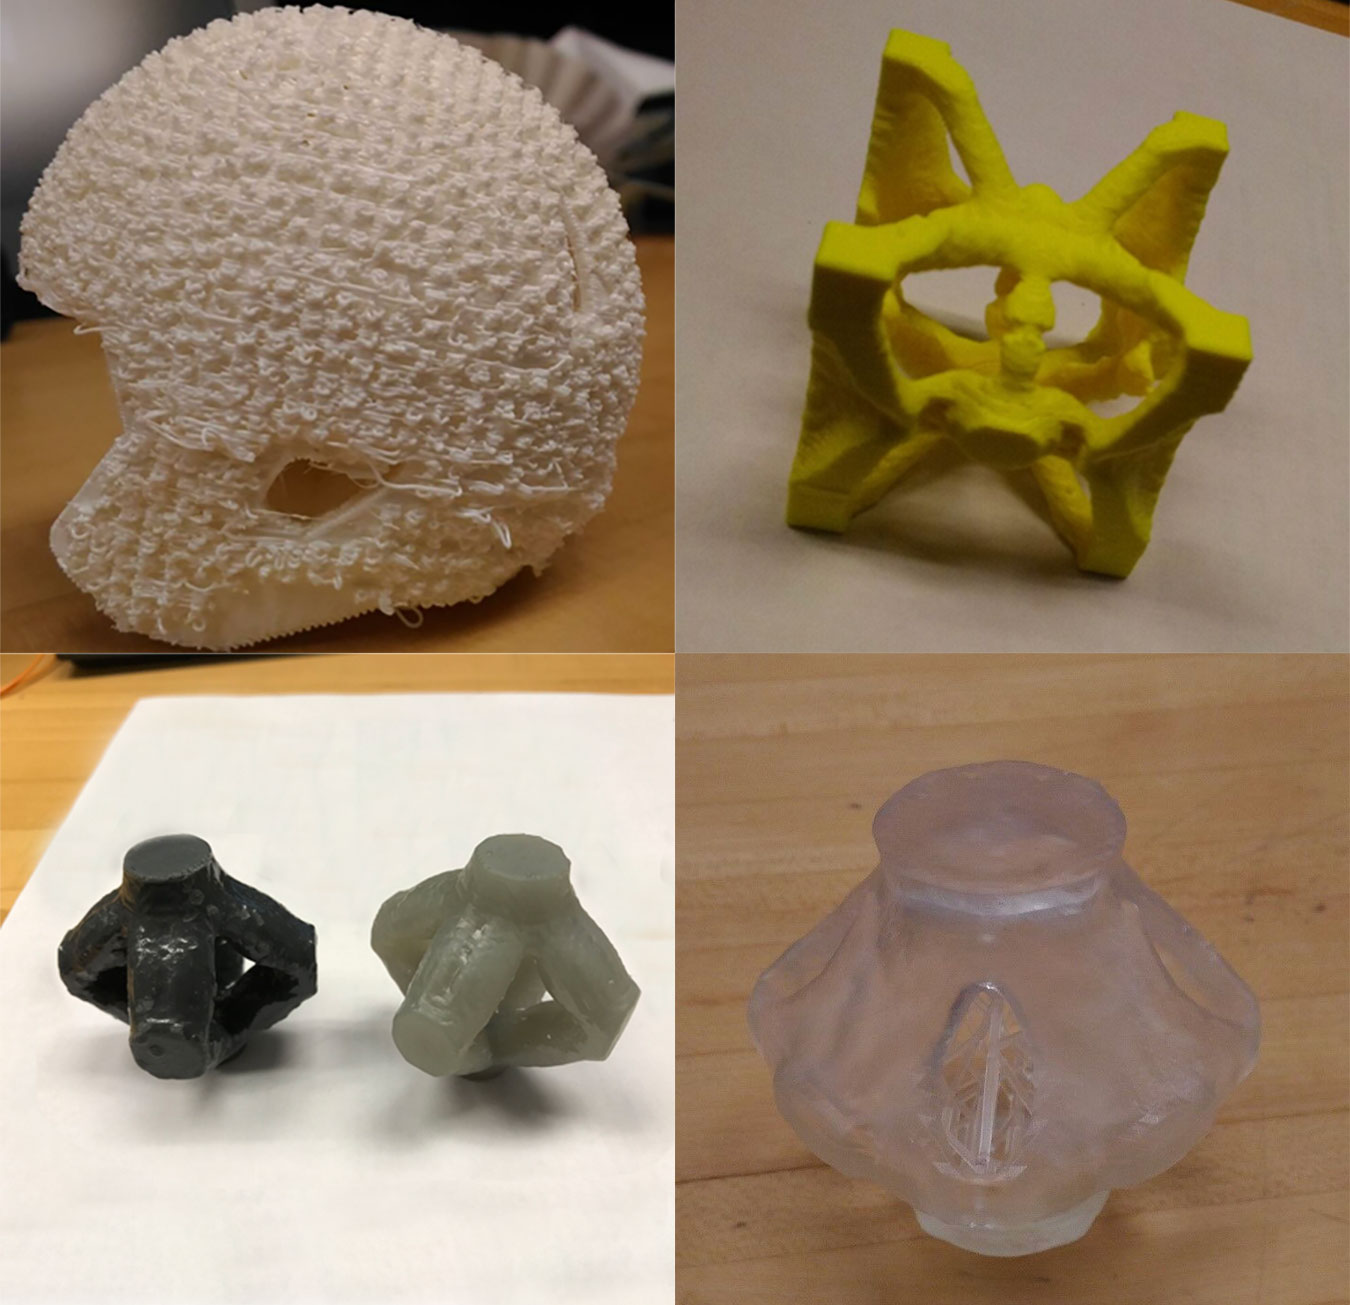 4 pictures of 3D printed objects